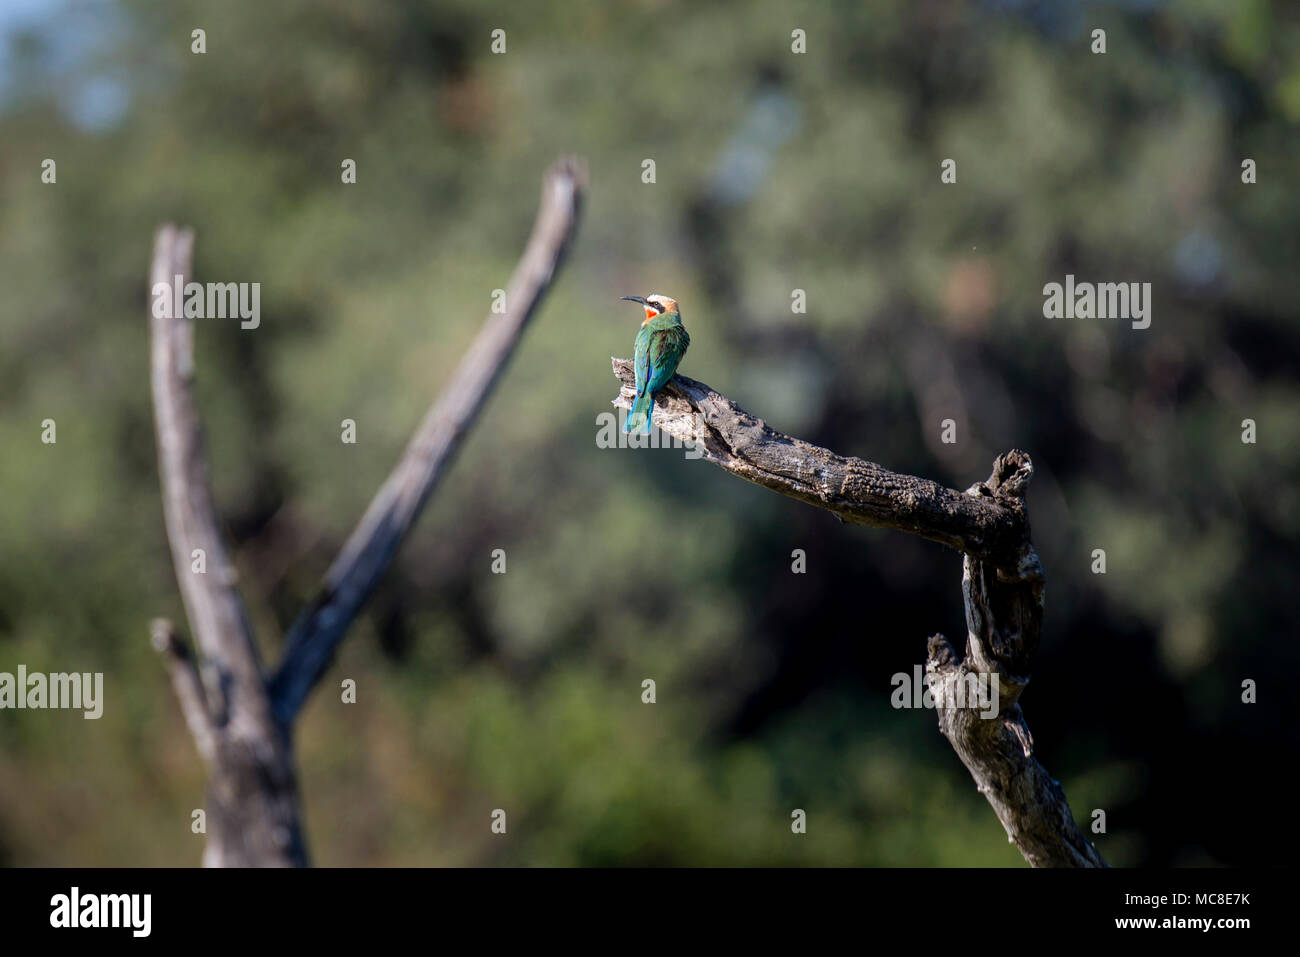 WHITE-FRONTED BEE-EATER (MEROPS BULLOCKOIDES) PERCHED ON A BRANCH, ZAMBIA Stock Photo